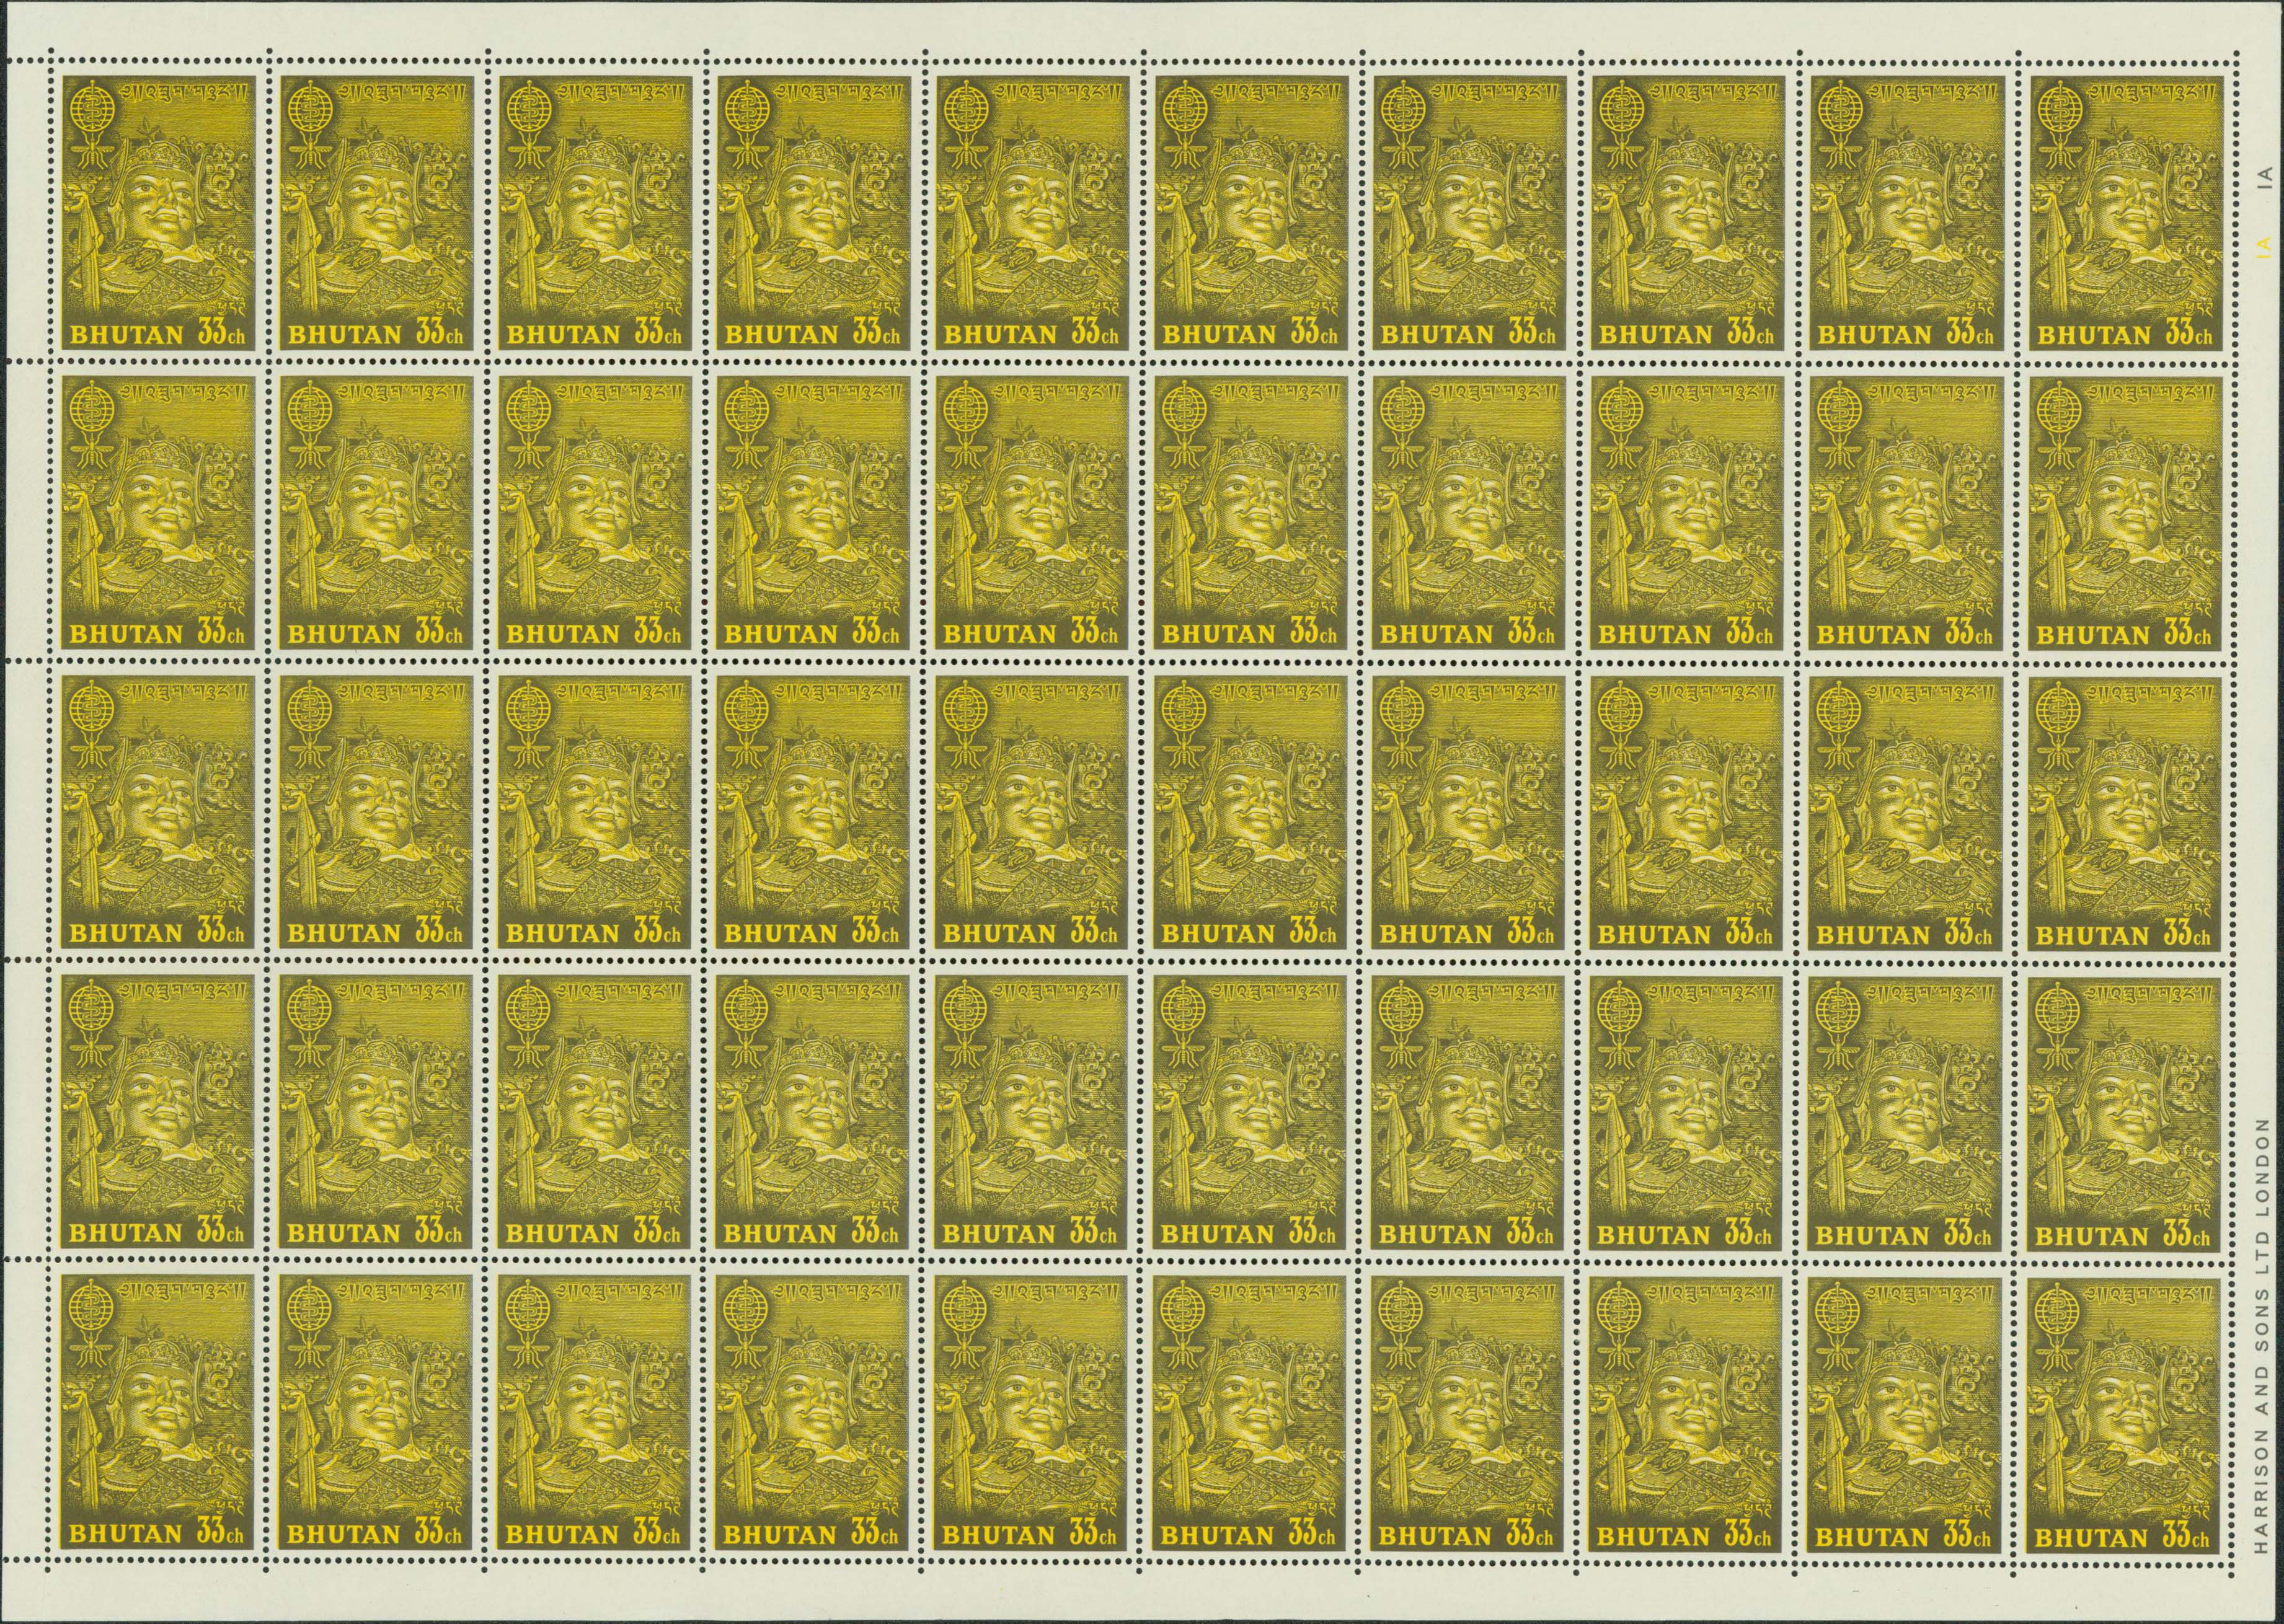 1962 Unissued Anti-Malaria 33ch Guru Rinpoche sheet in the planned colors.